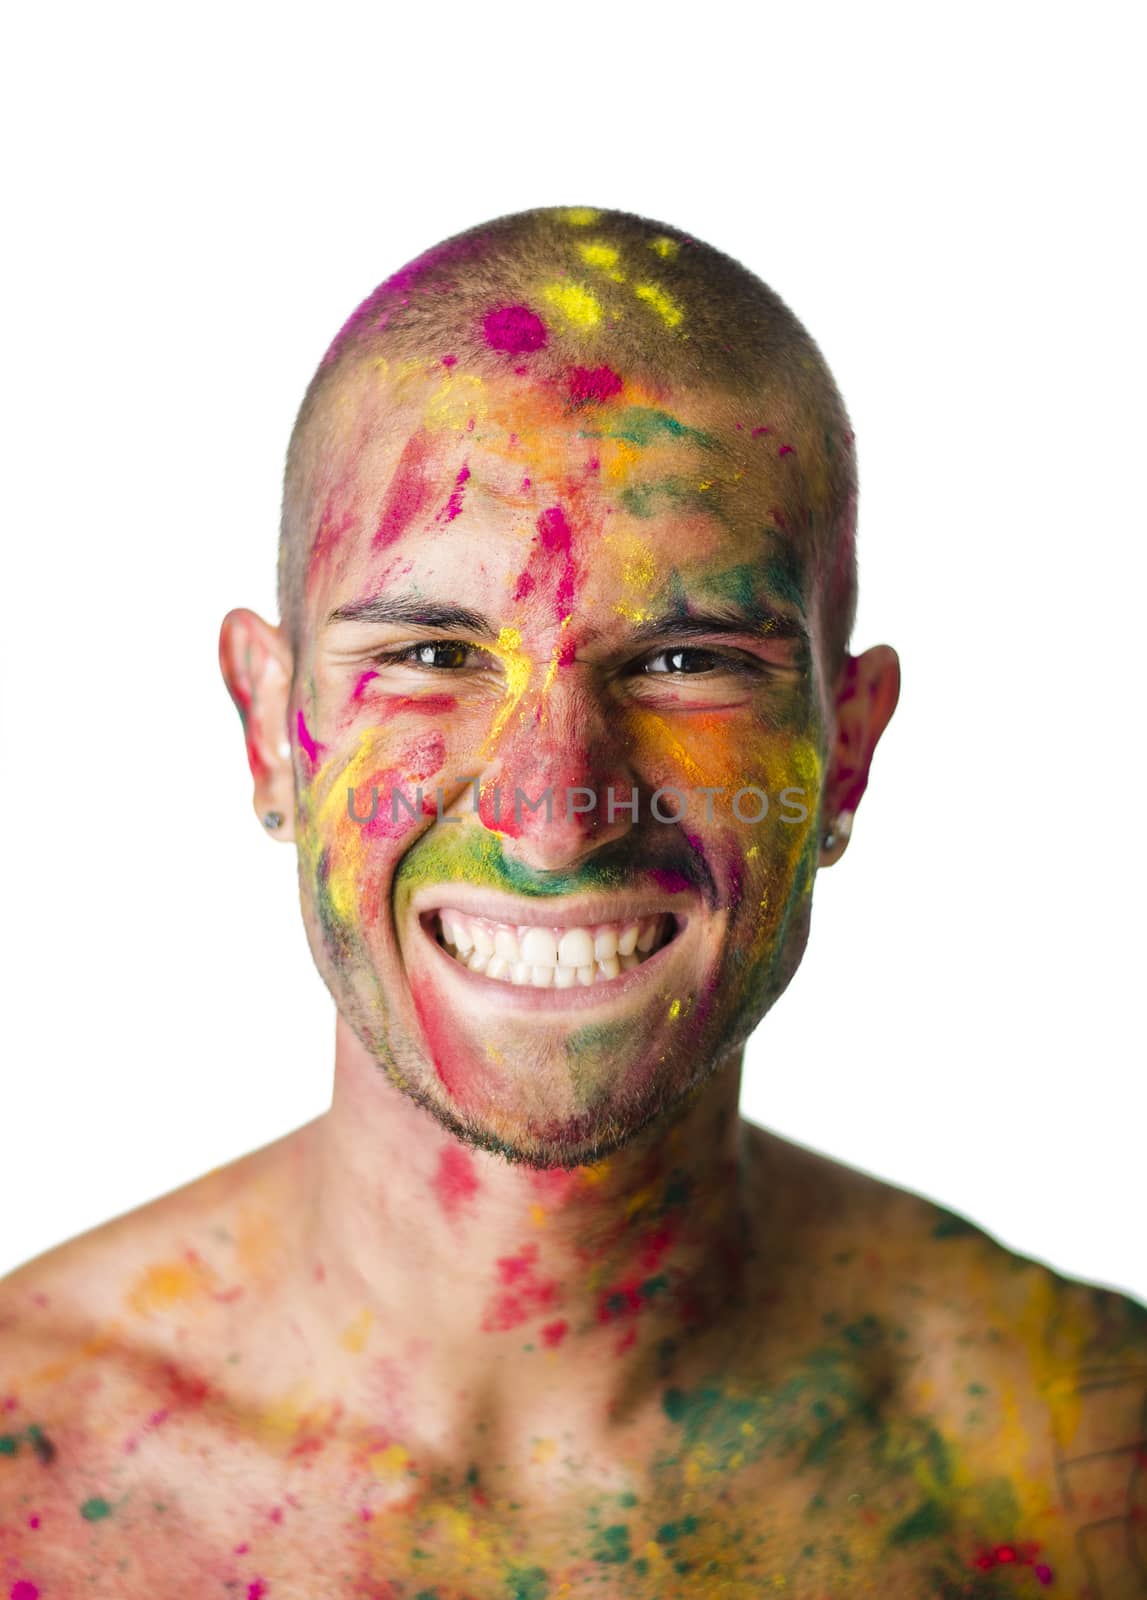 Head and shoulders shot of attractive smiling young man shirtless, skin painted all over with bright Holi colors, looking at camera, isolated on black background